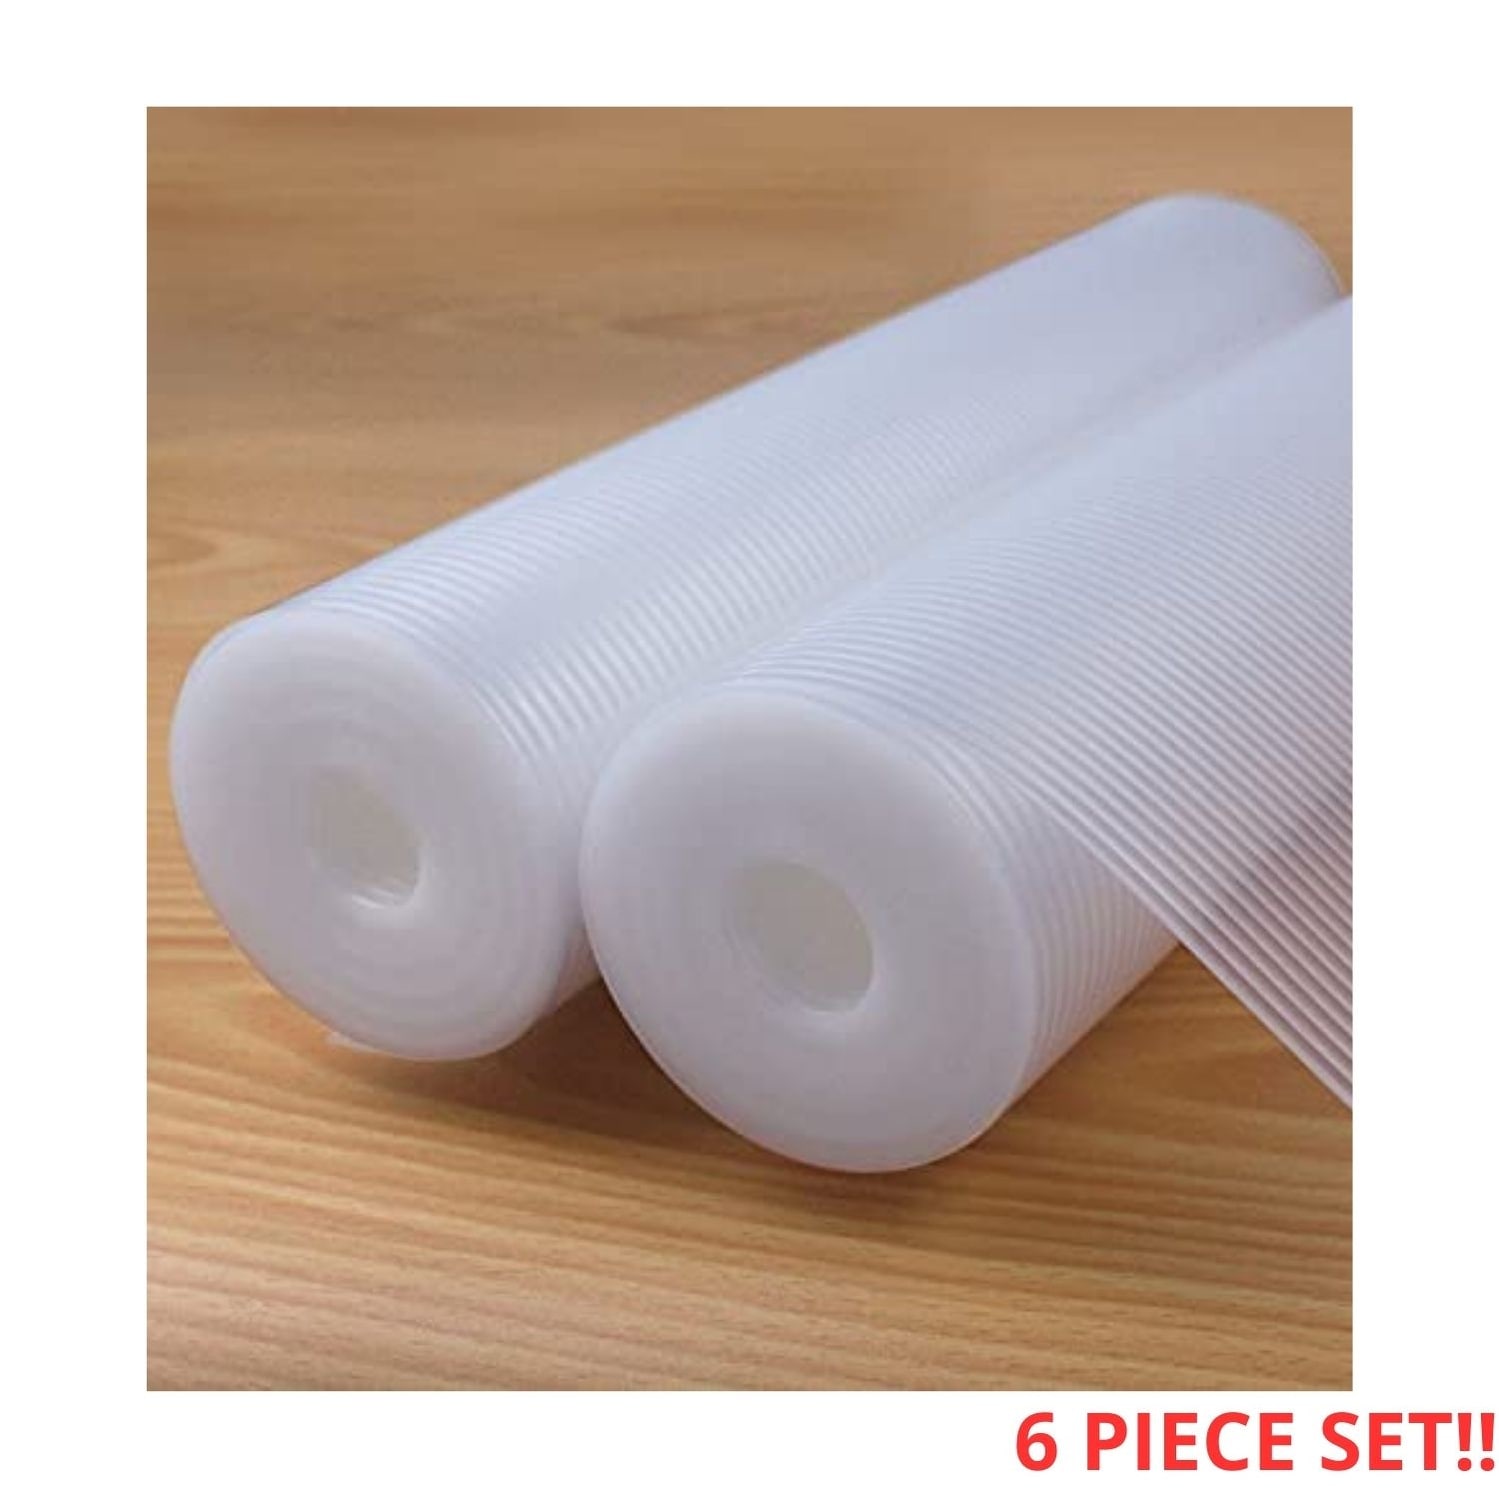 https://ak1.ostkcdn.com/images/products/is/images/direct/ca8aeb12881fce9cbbe8e107bd5f39a3f505af98/Glomen-Premium-Clear-Non-Adhesive-Non-Slip-Shelf-and-Drawer-Liner-12-Inches-x-20-FT-Set-of-6.jpg